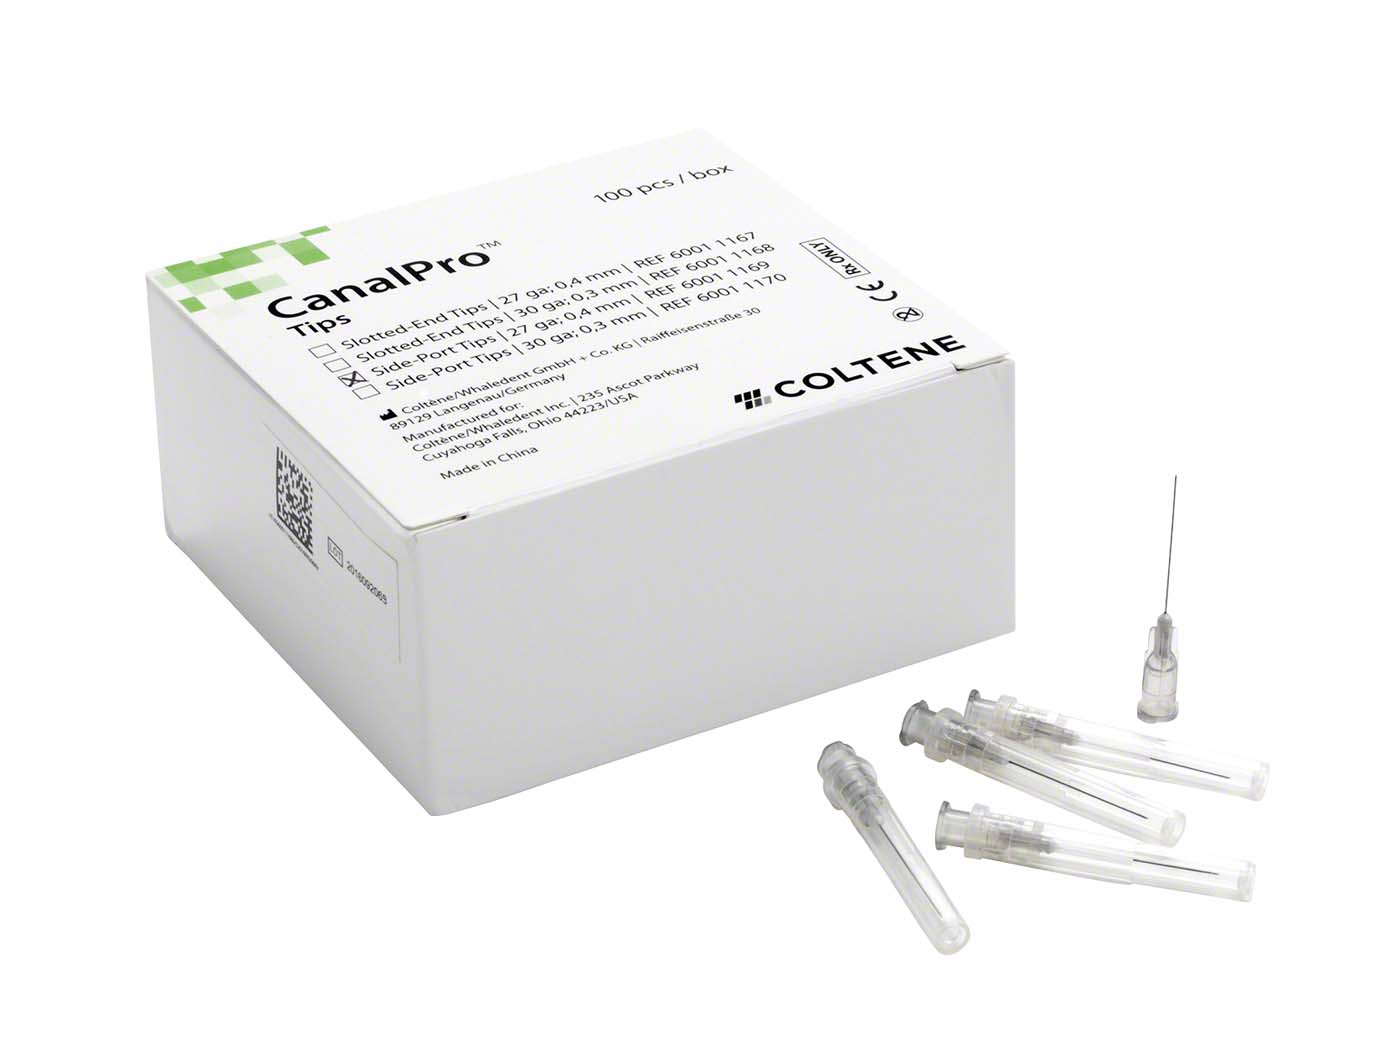 CanalPro Side-Port Tips COLTENE